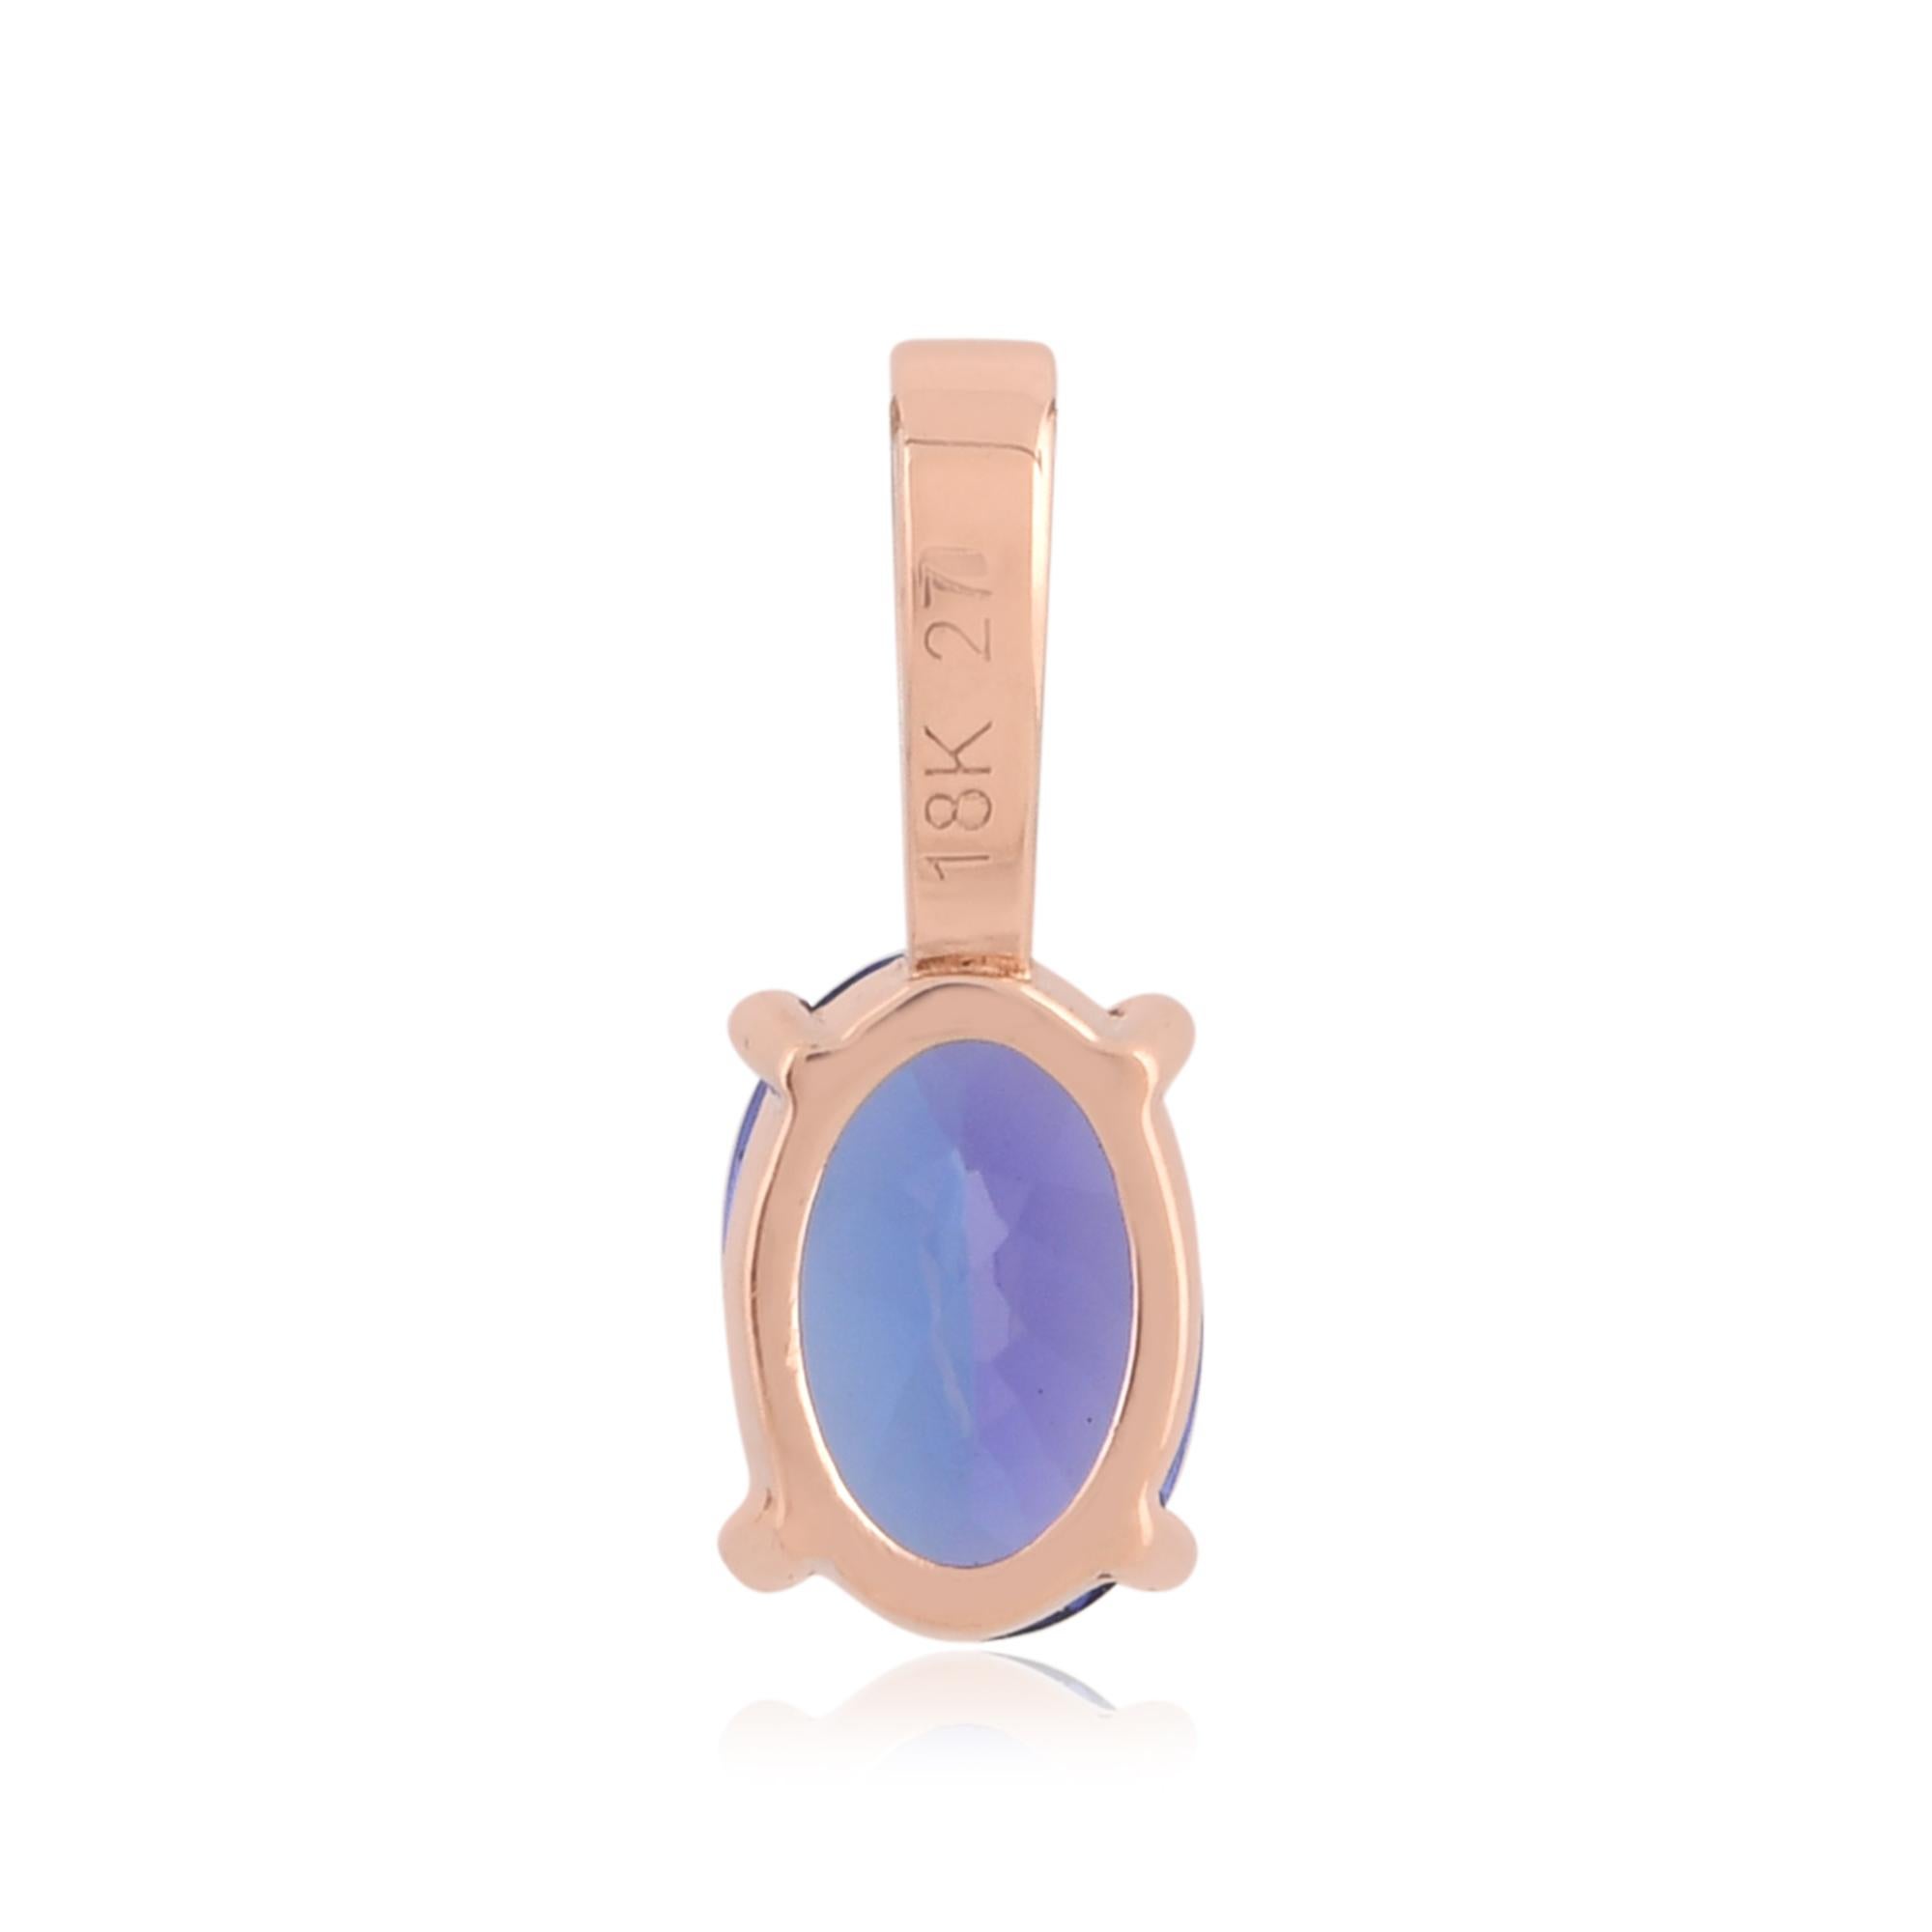 The pendant is expertly crafted in 18 karat rose gold, chosen for its warm and luxurious appearance. The rose gold setting complements the Tanzanite and diamonds, creating a harmonious blend of elegance and femininity. 

Item Code :- SEPD-3387
Gross